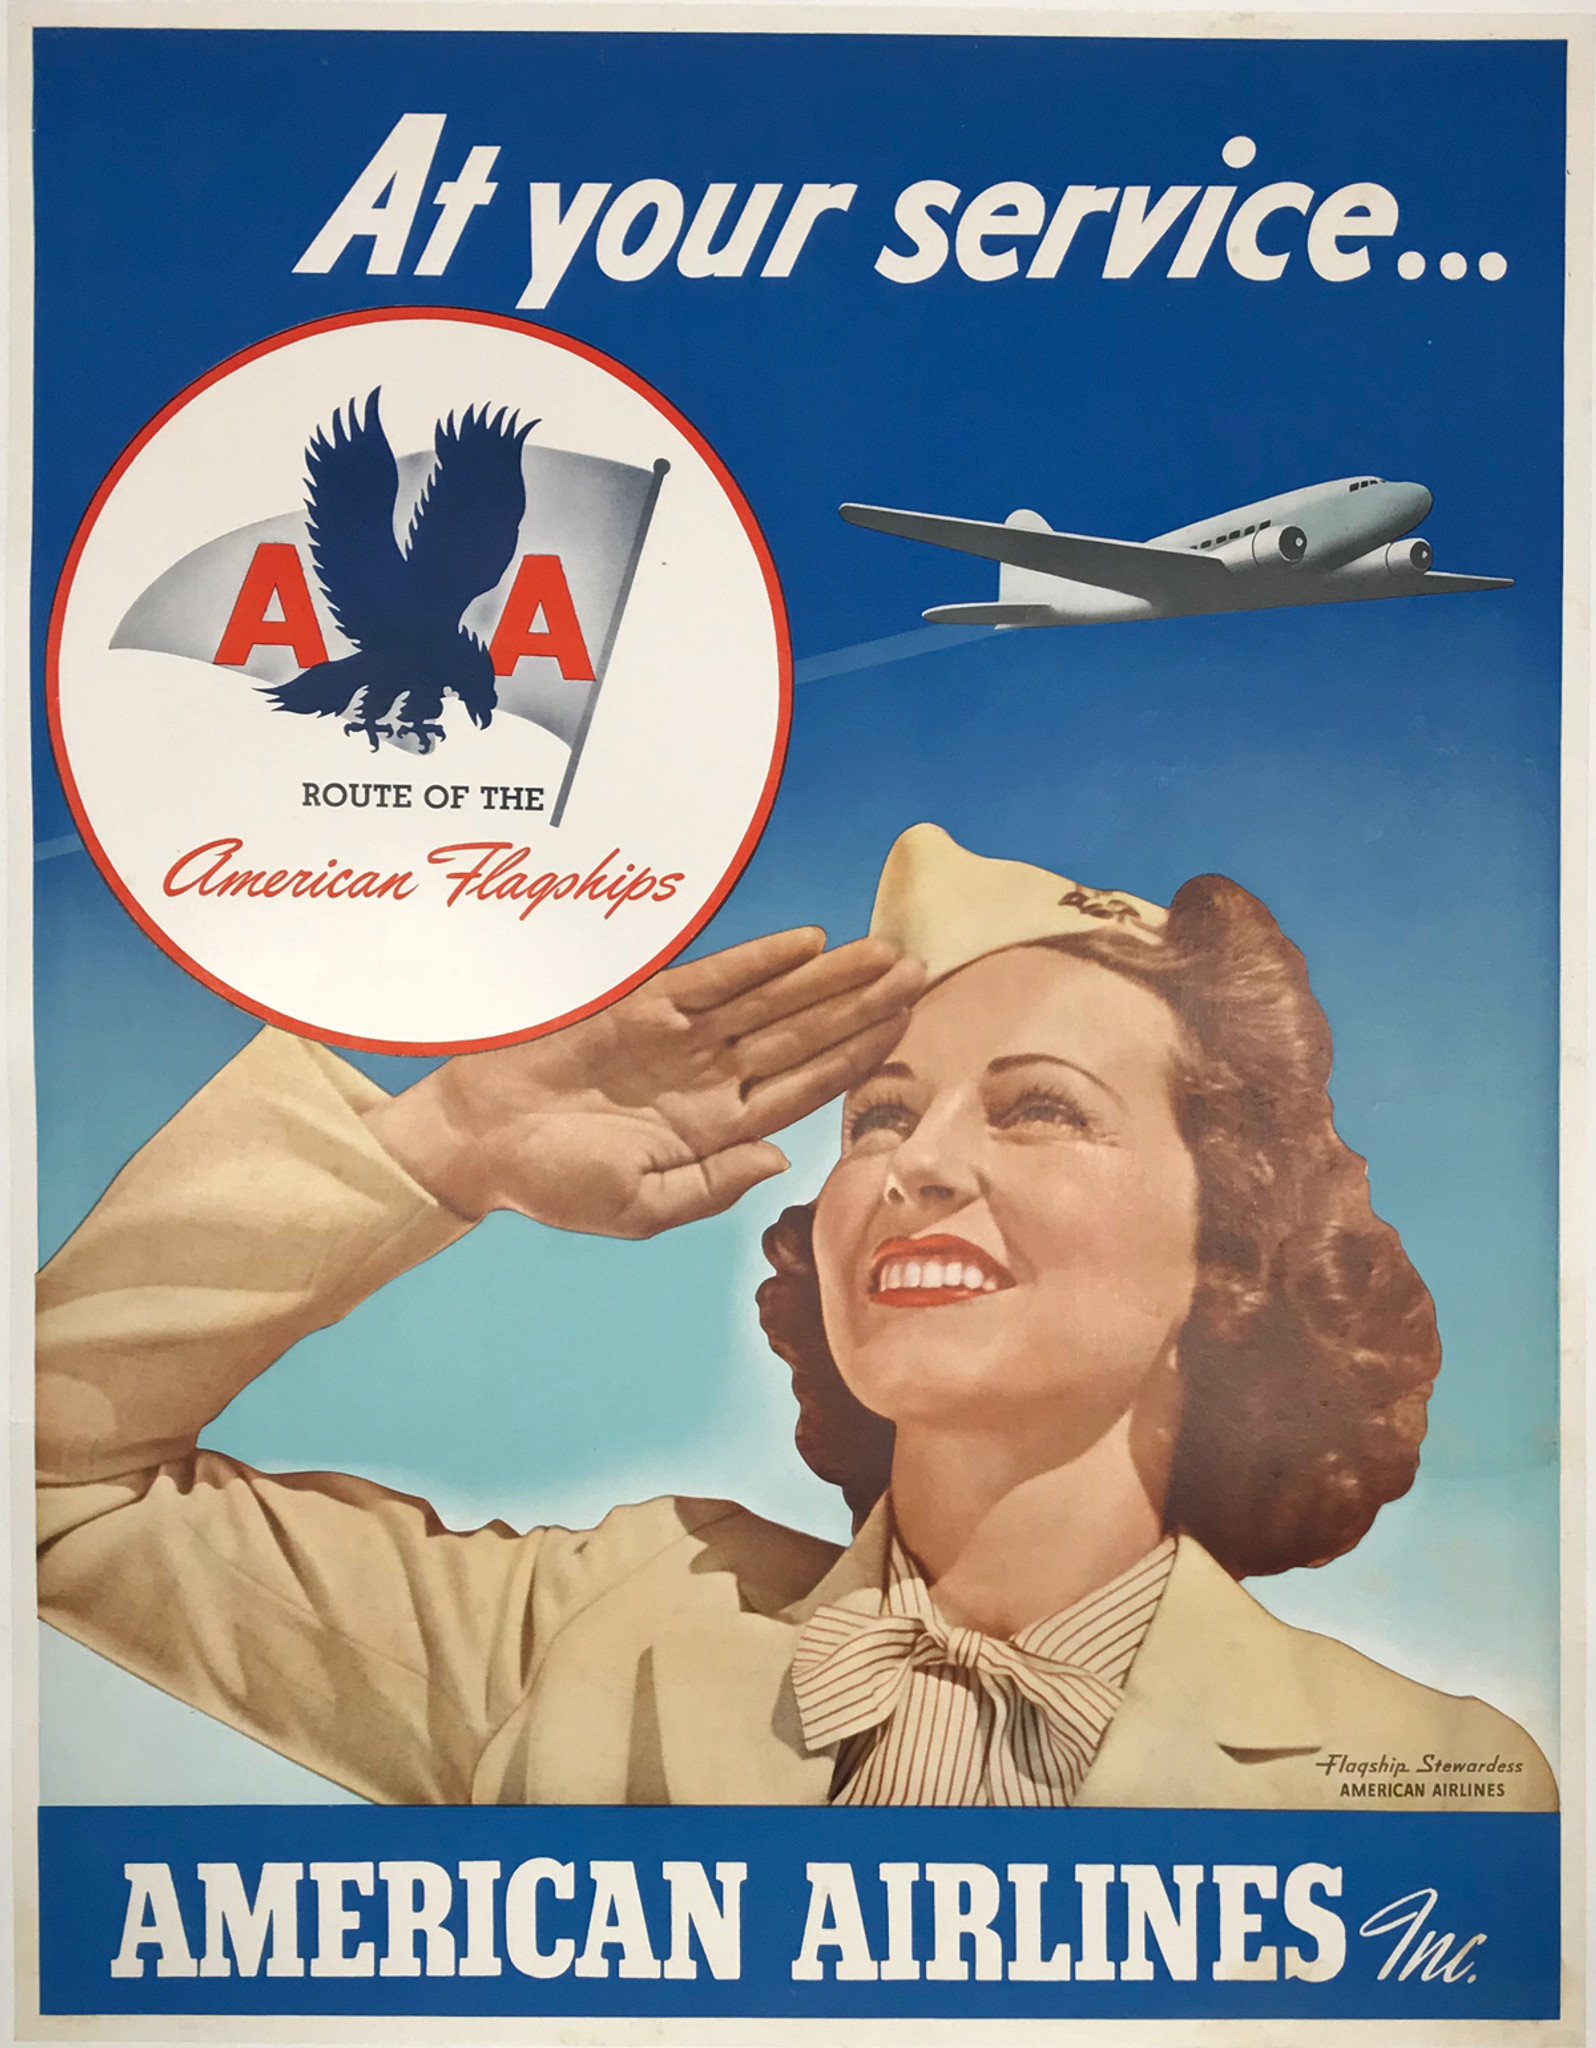 American Airlines At Your Service Original 1940s Vintage American